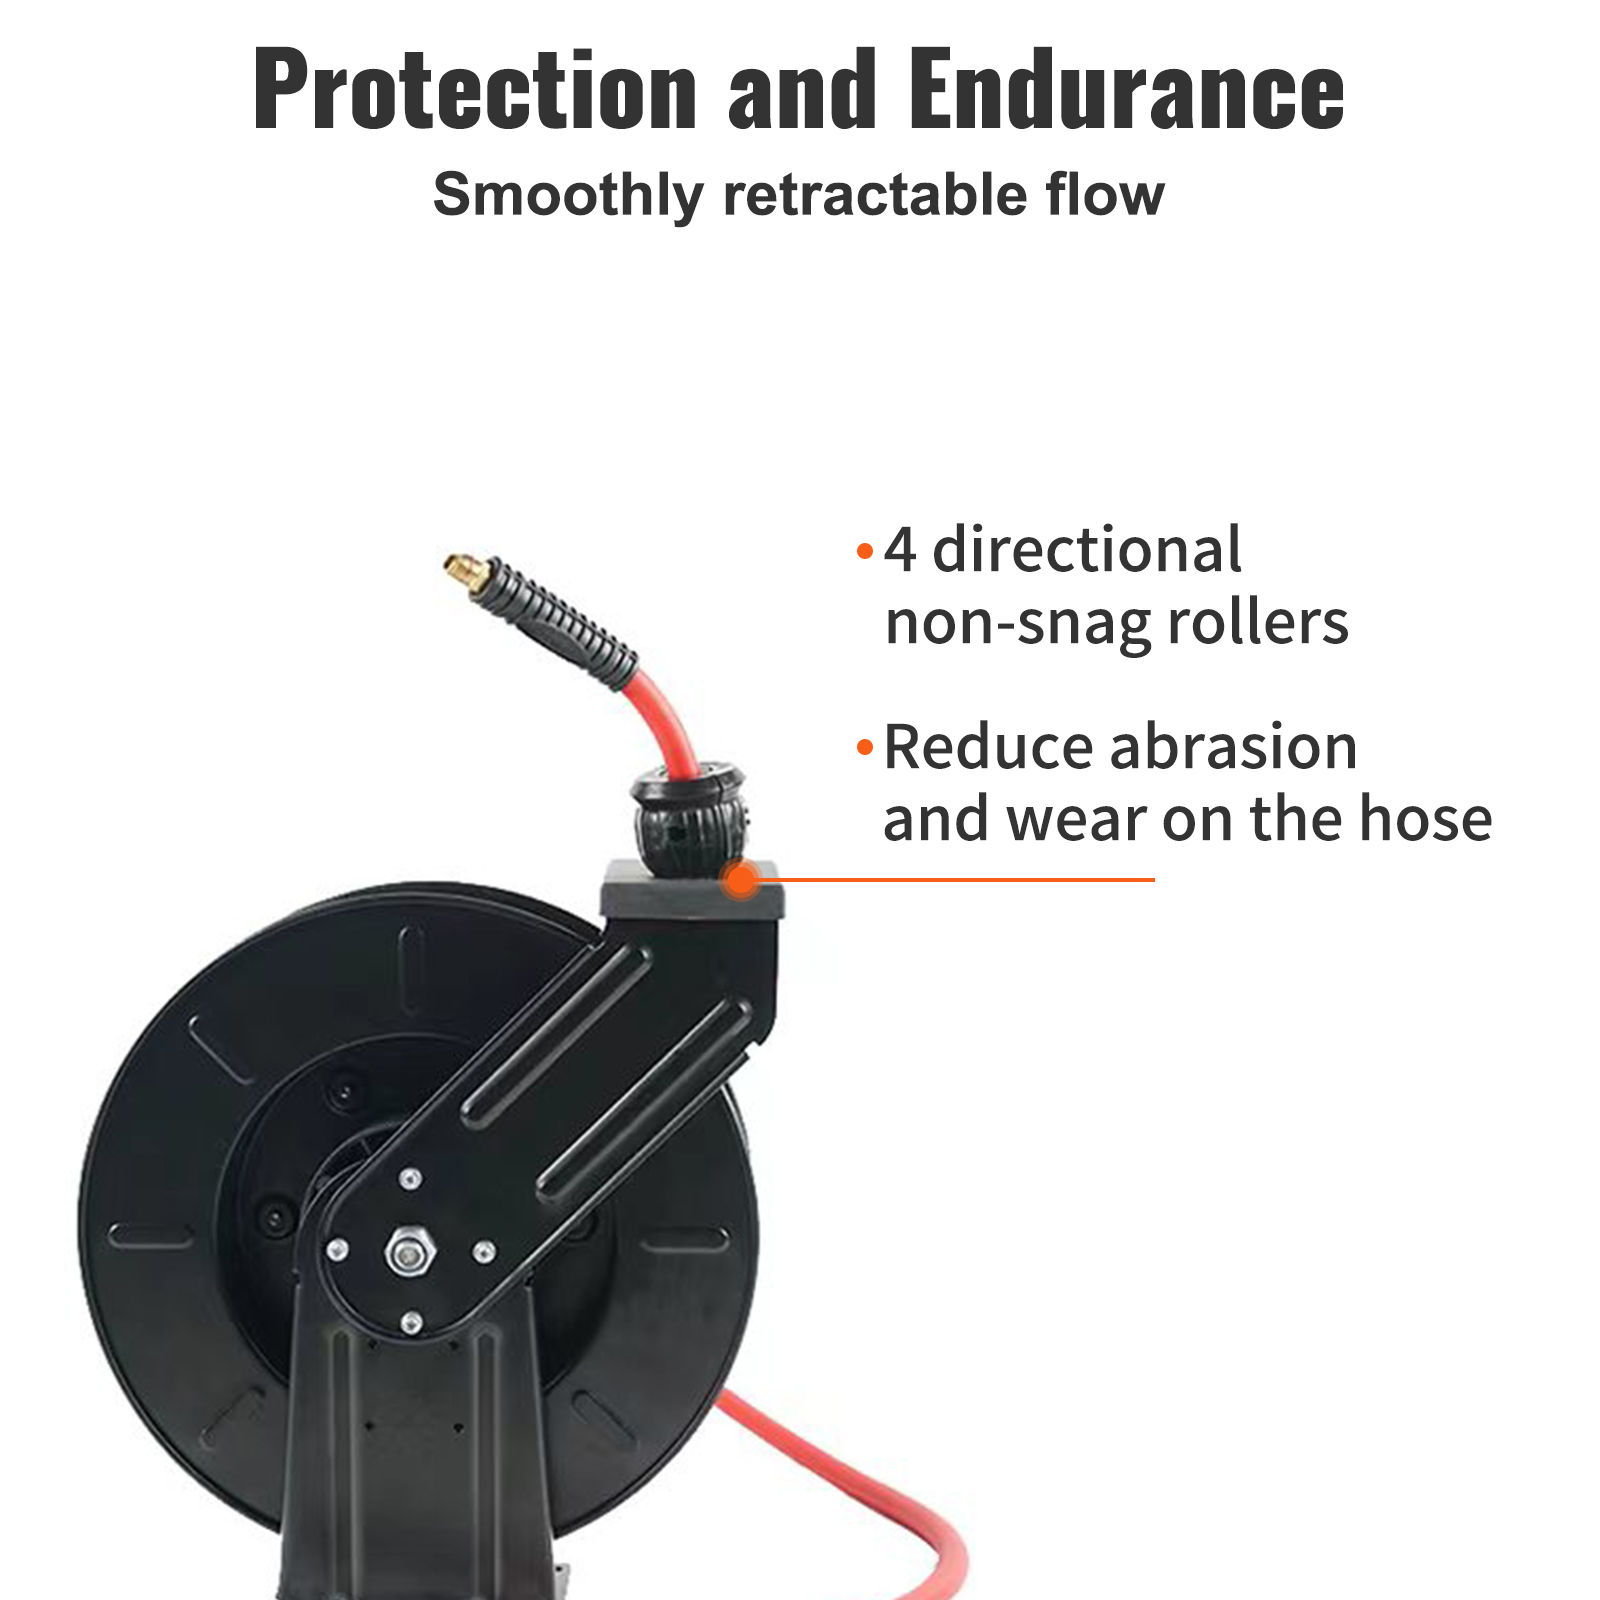 VEVOR VEVOR Retractable Air Hose Reel, 1/2 IN x 50 FT Hybrid Polymer Hose  MAX 300PSI, Pneumatic Ceiling / Wall Mount Heavy Duty Double Arm Steel Reel  Auto Rewind